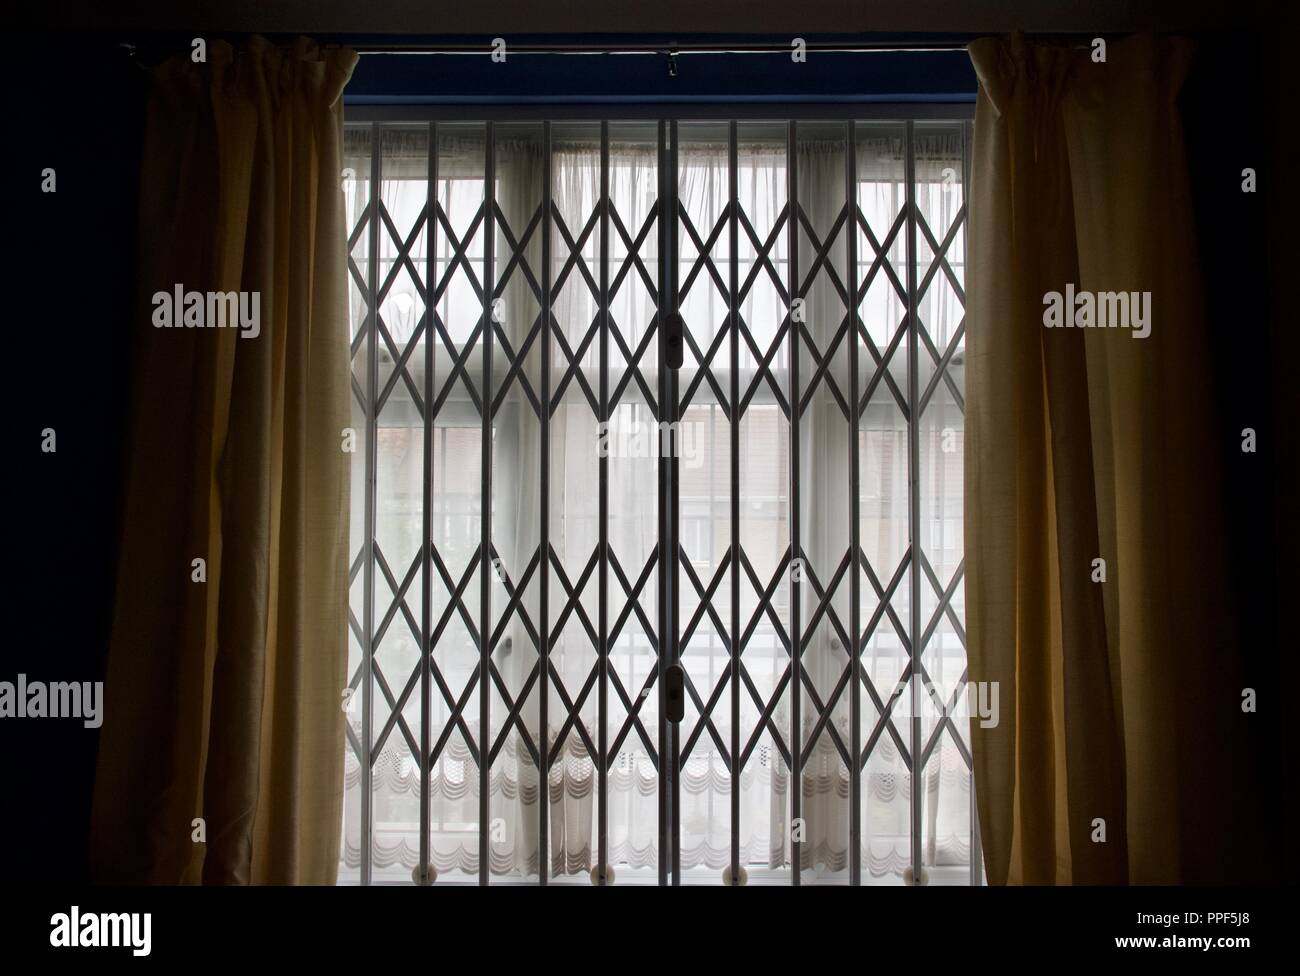 Home security bars on windows, often used in houses in unsafe areas to protect against burglars Stock Photo